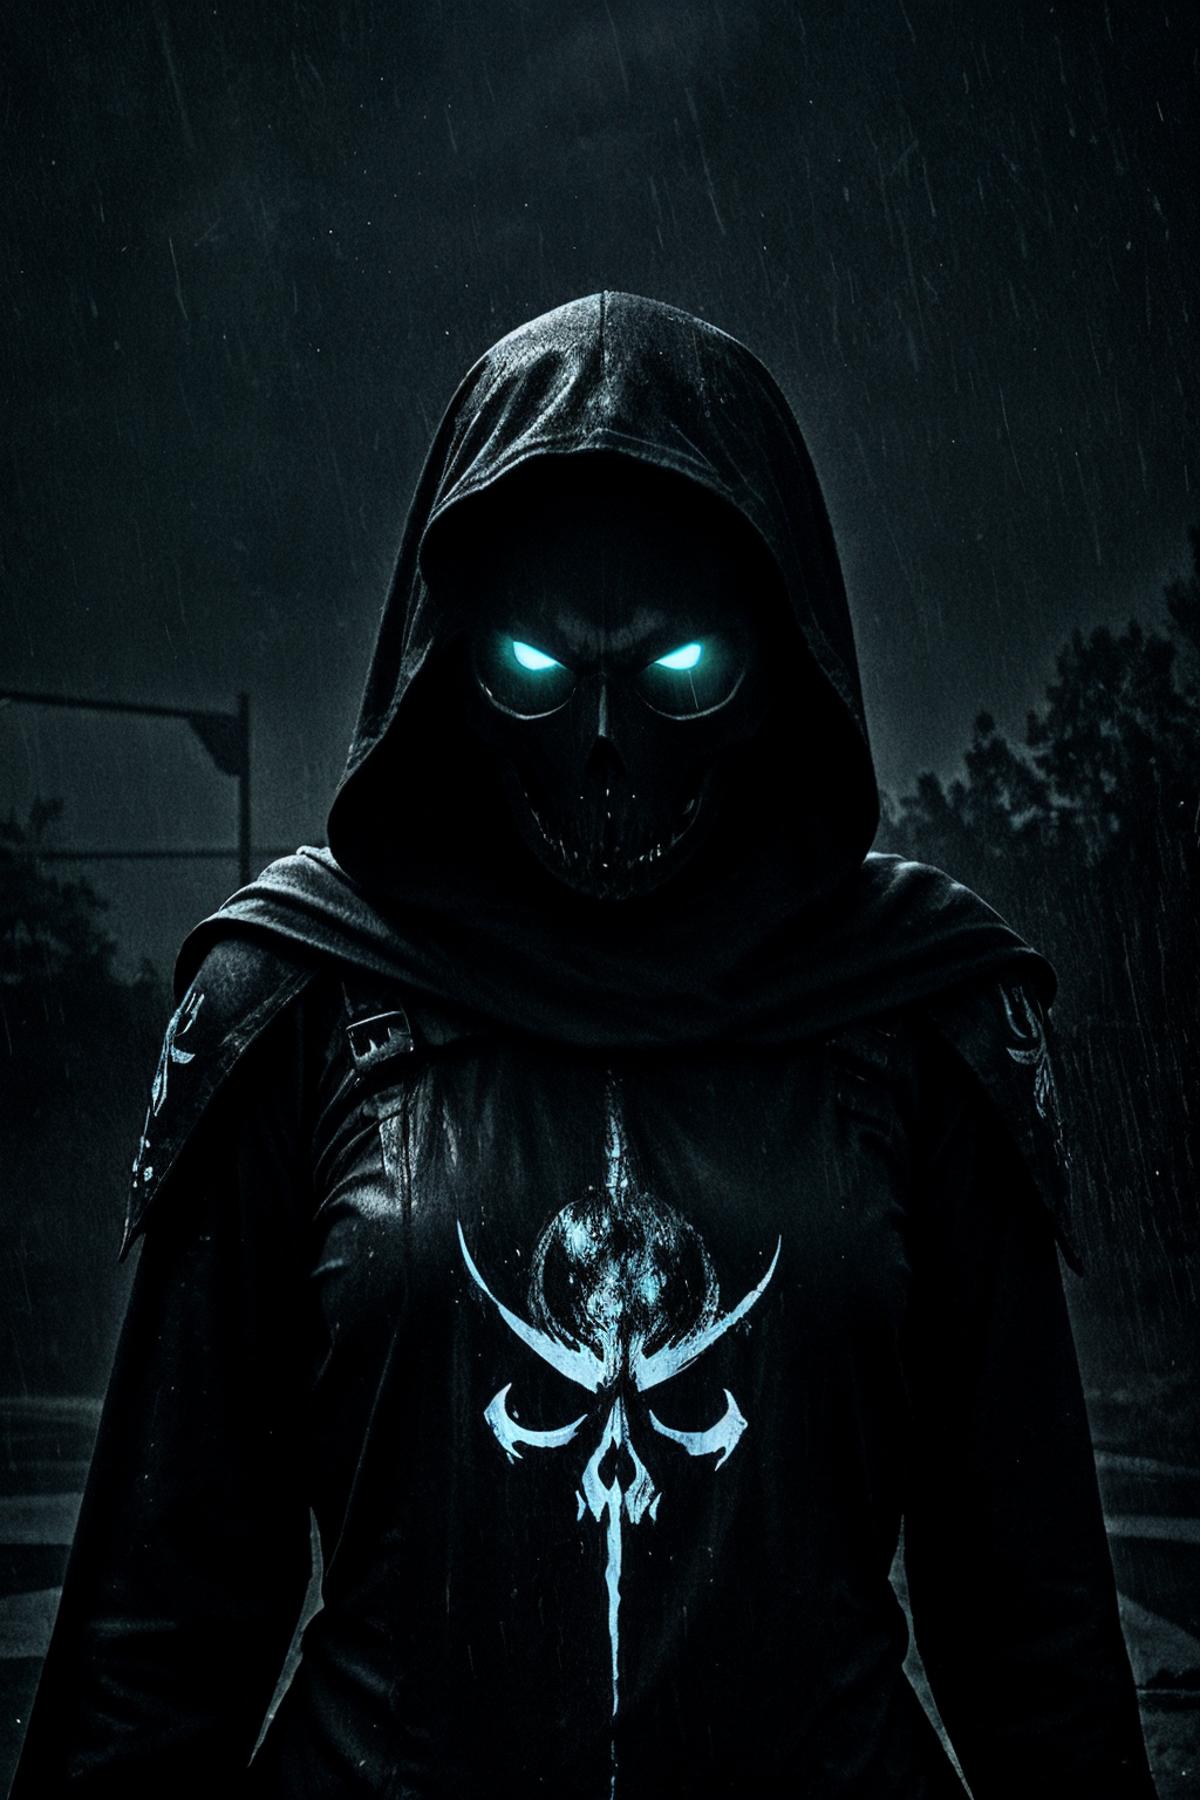 Black hooded figure with blue eyes and a white and black emblem on the chest.